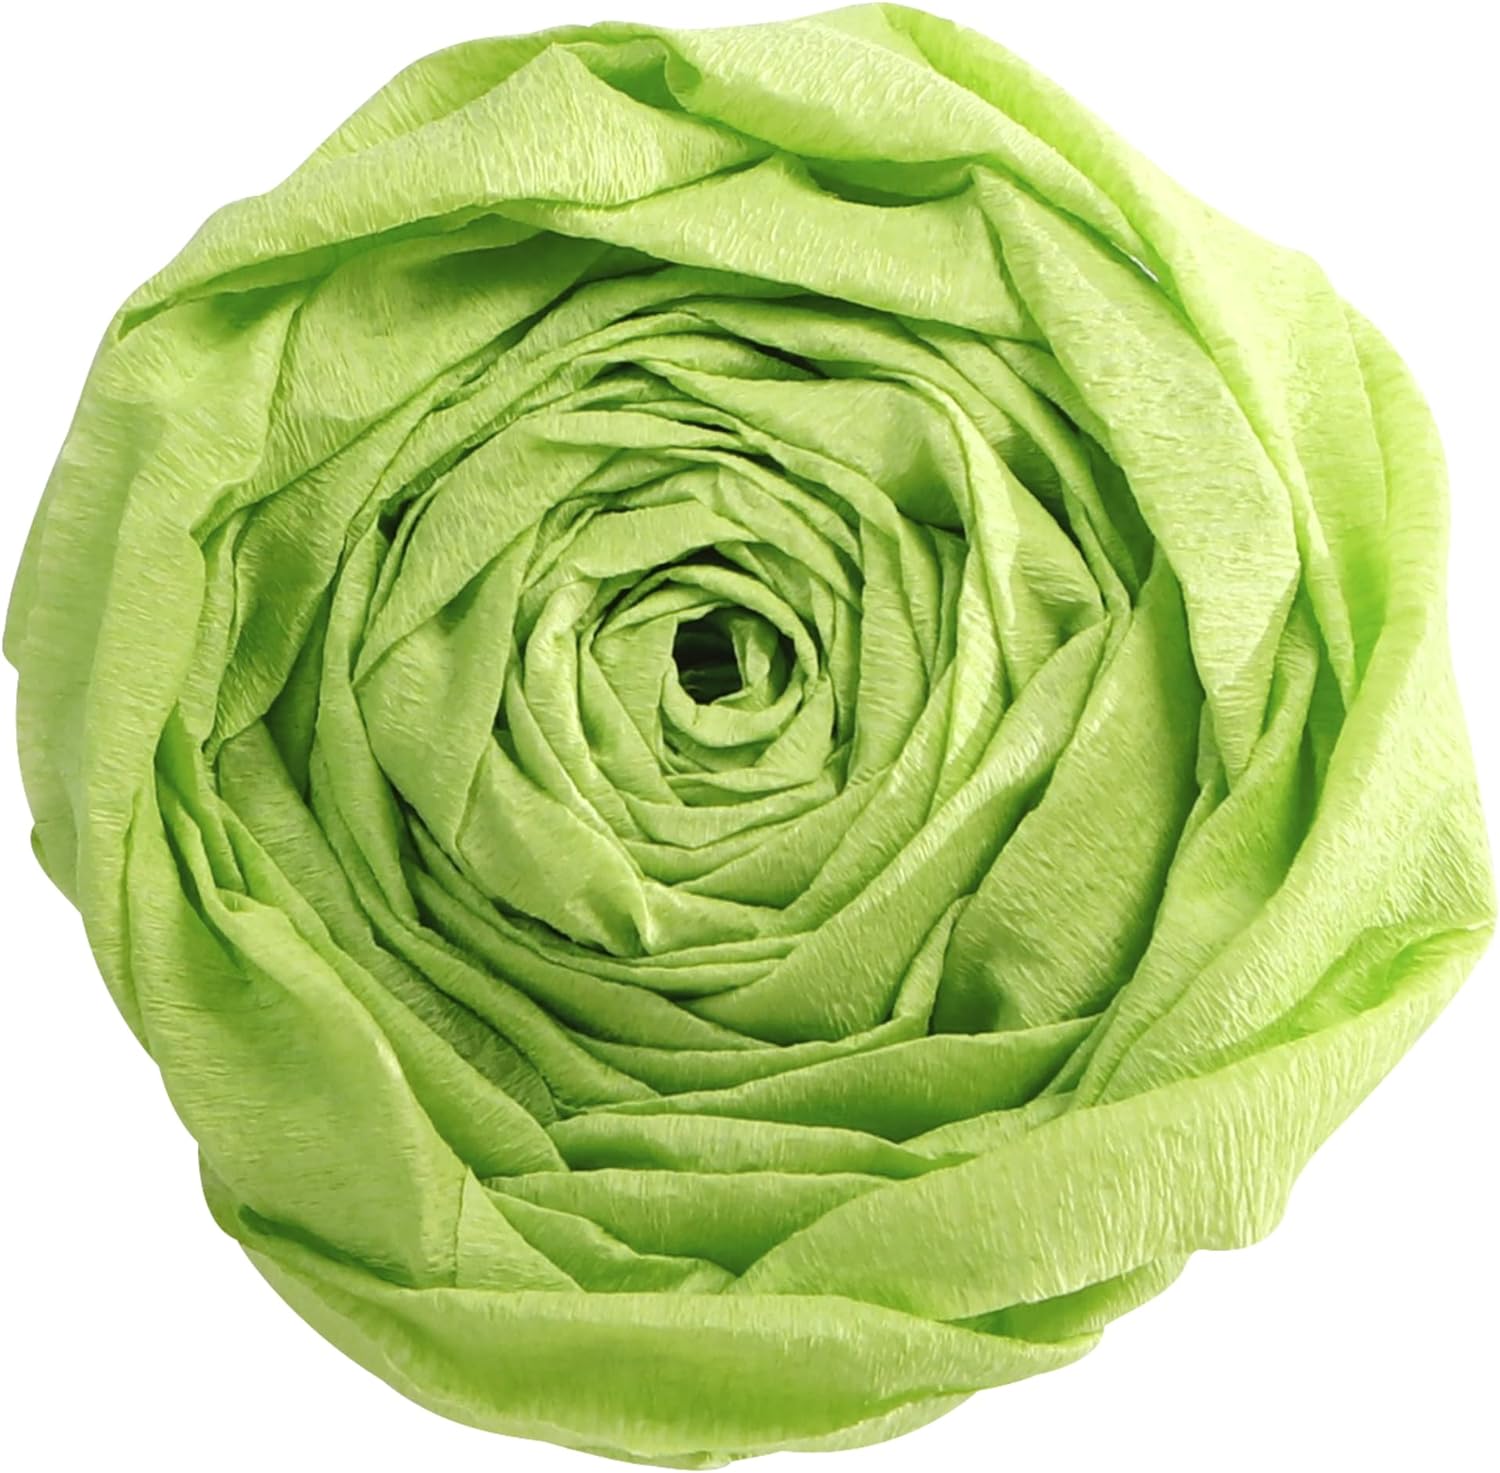 CLAIREFONTAINE Crepe Paper Roll 75% 2.5x0.5M Apple Green